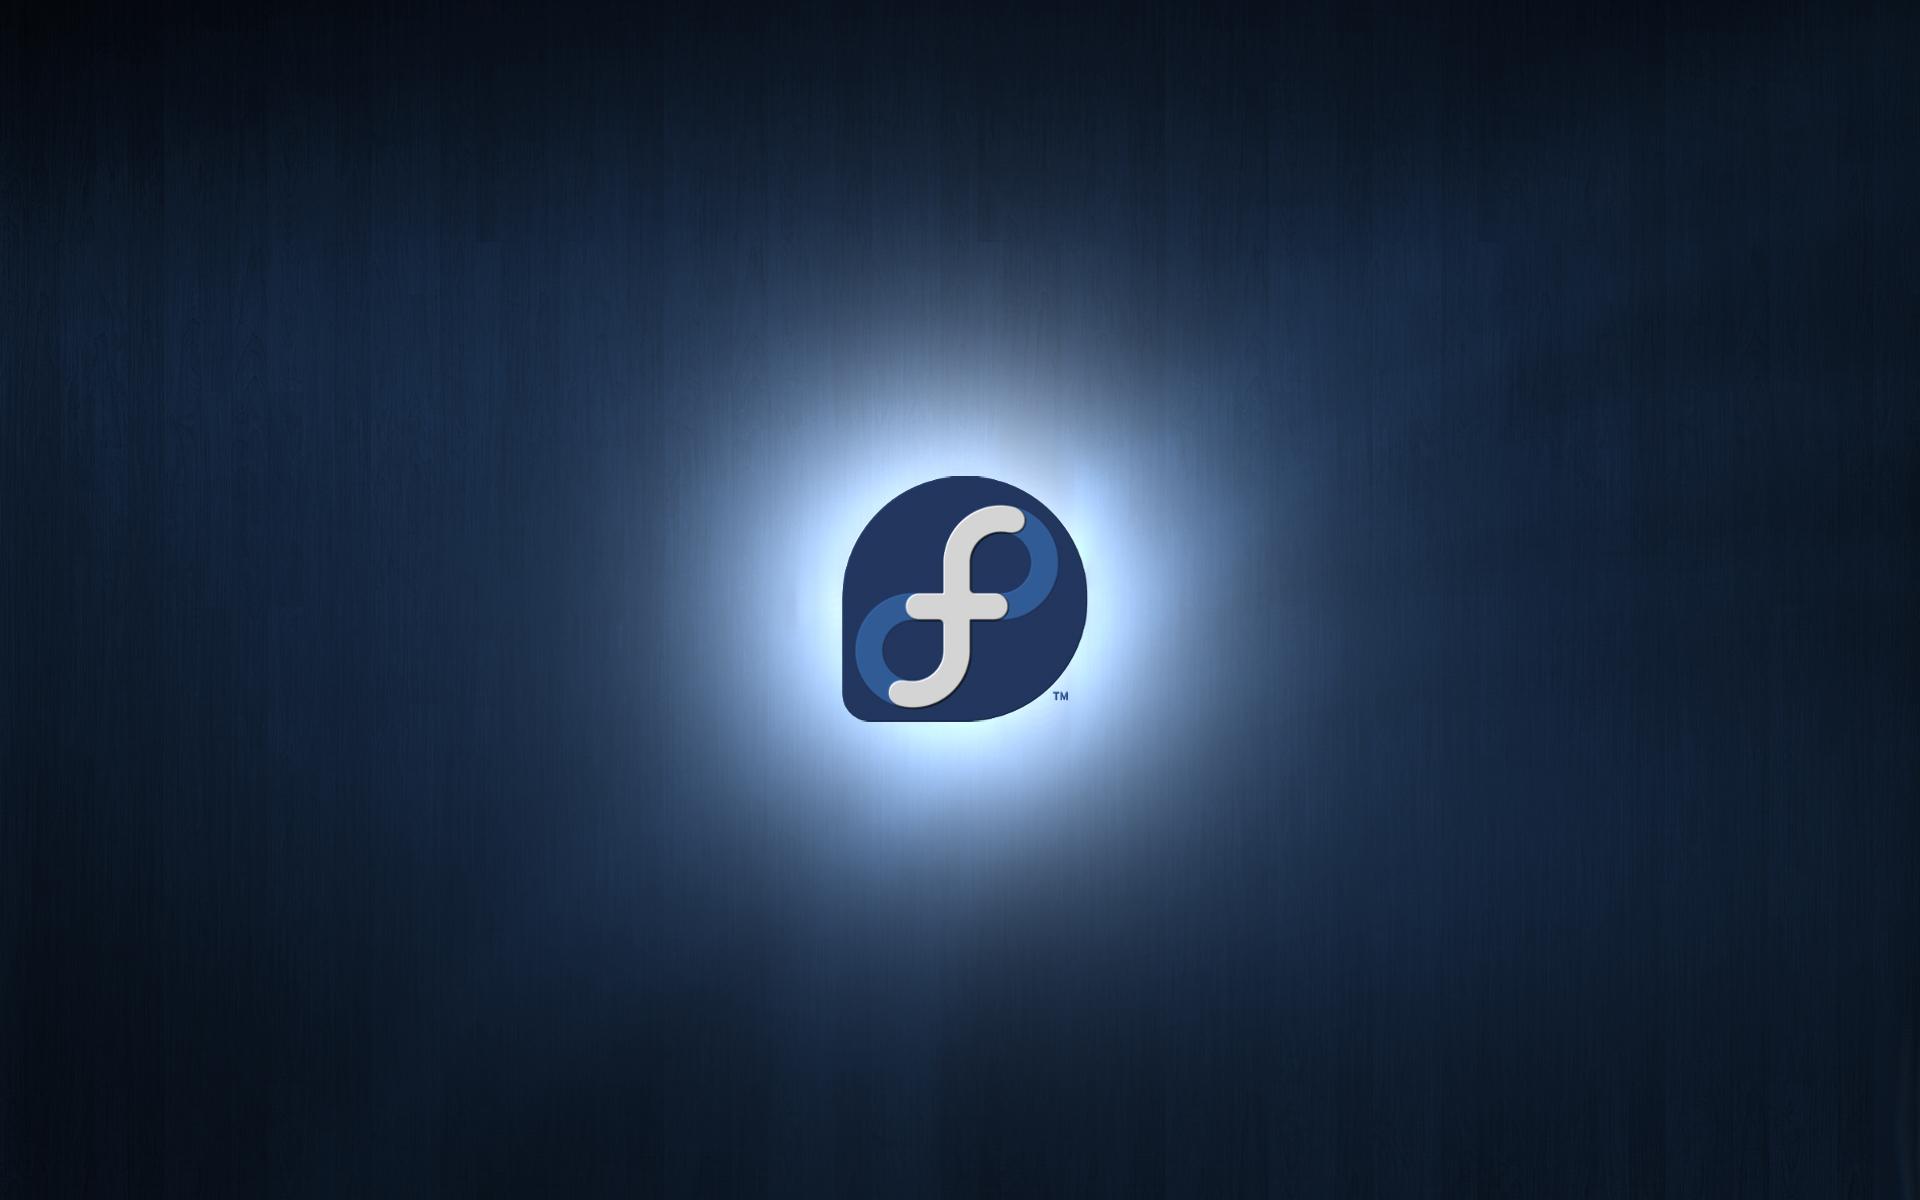 Linux Fedora Logo, HD Computer, 4k Wallpapers, Images, Backgrounds